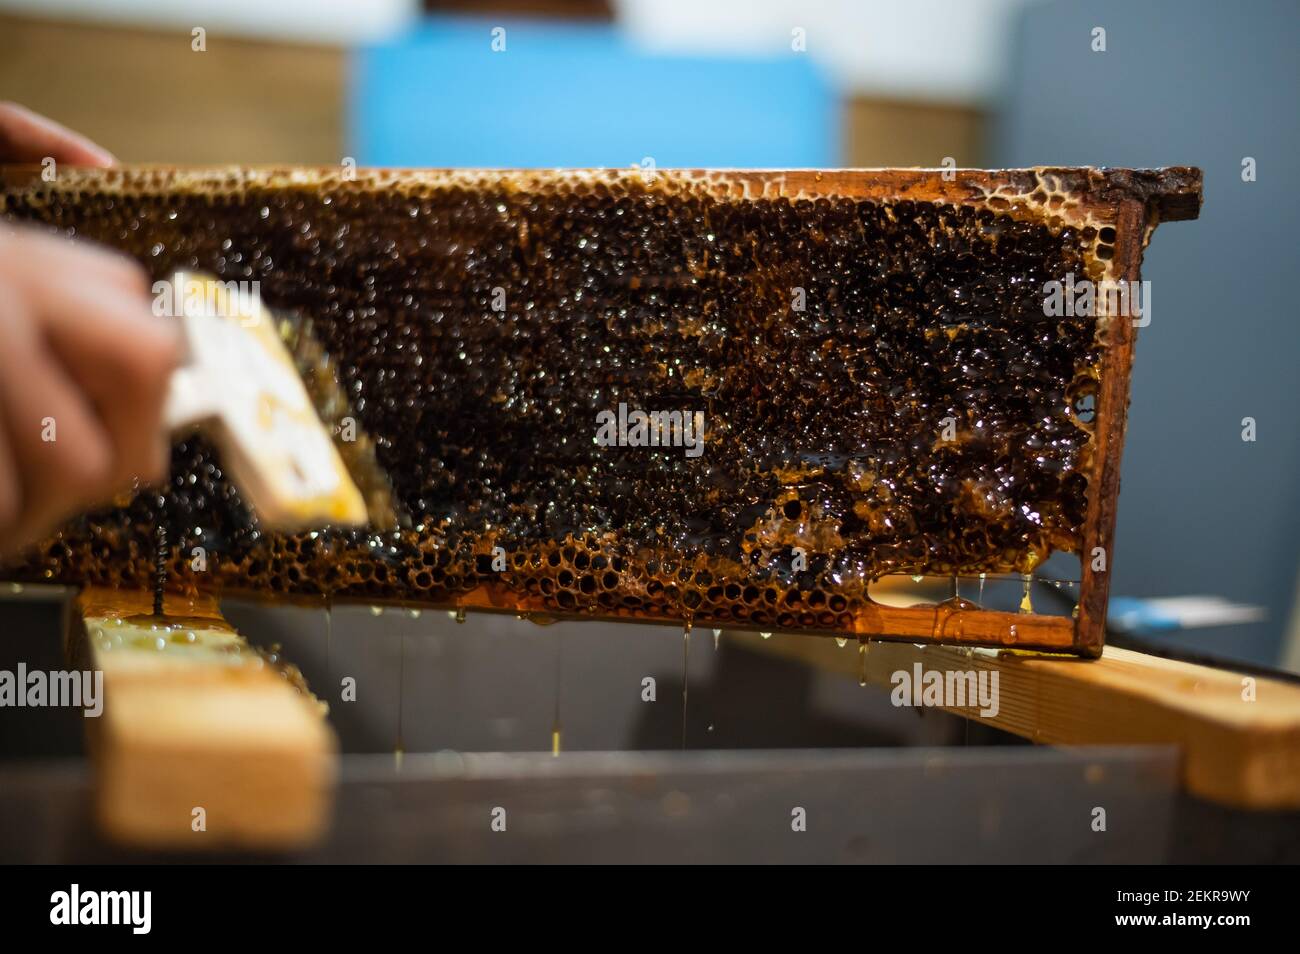 Uncovering the honeycombs with the scraper by hand, honey harvest. Stock Photo